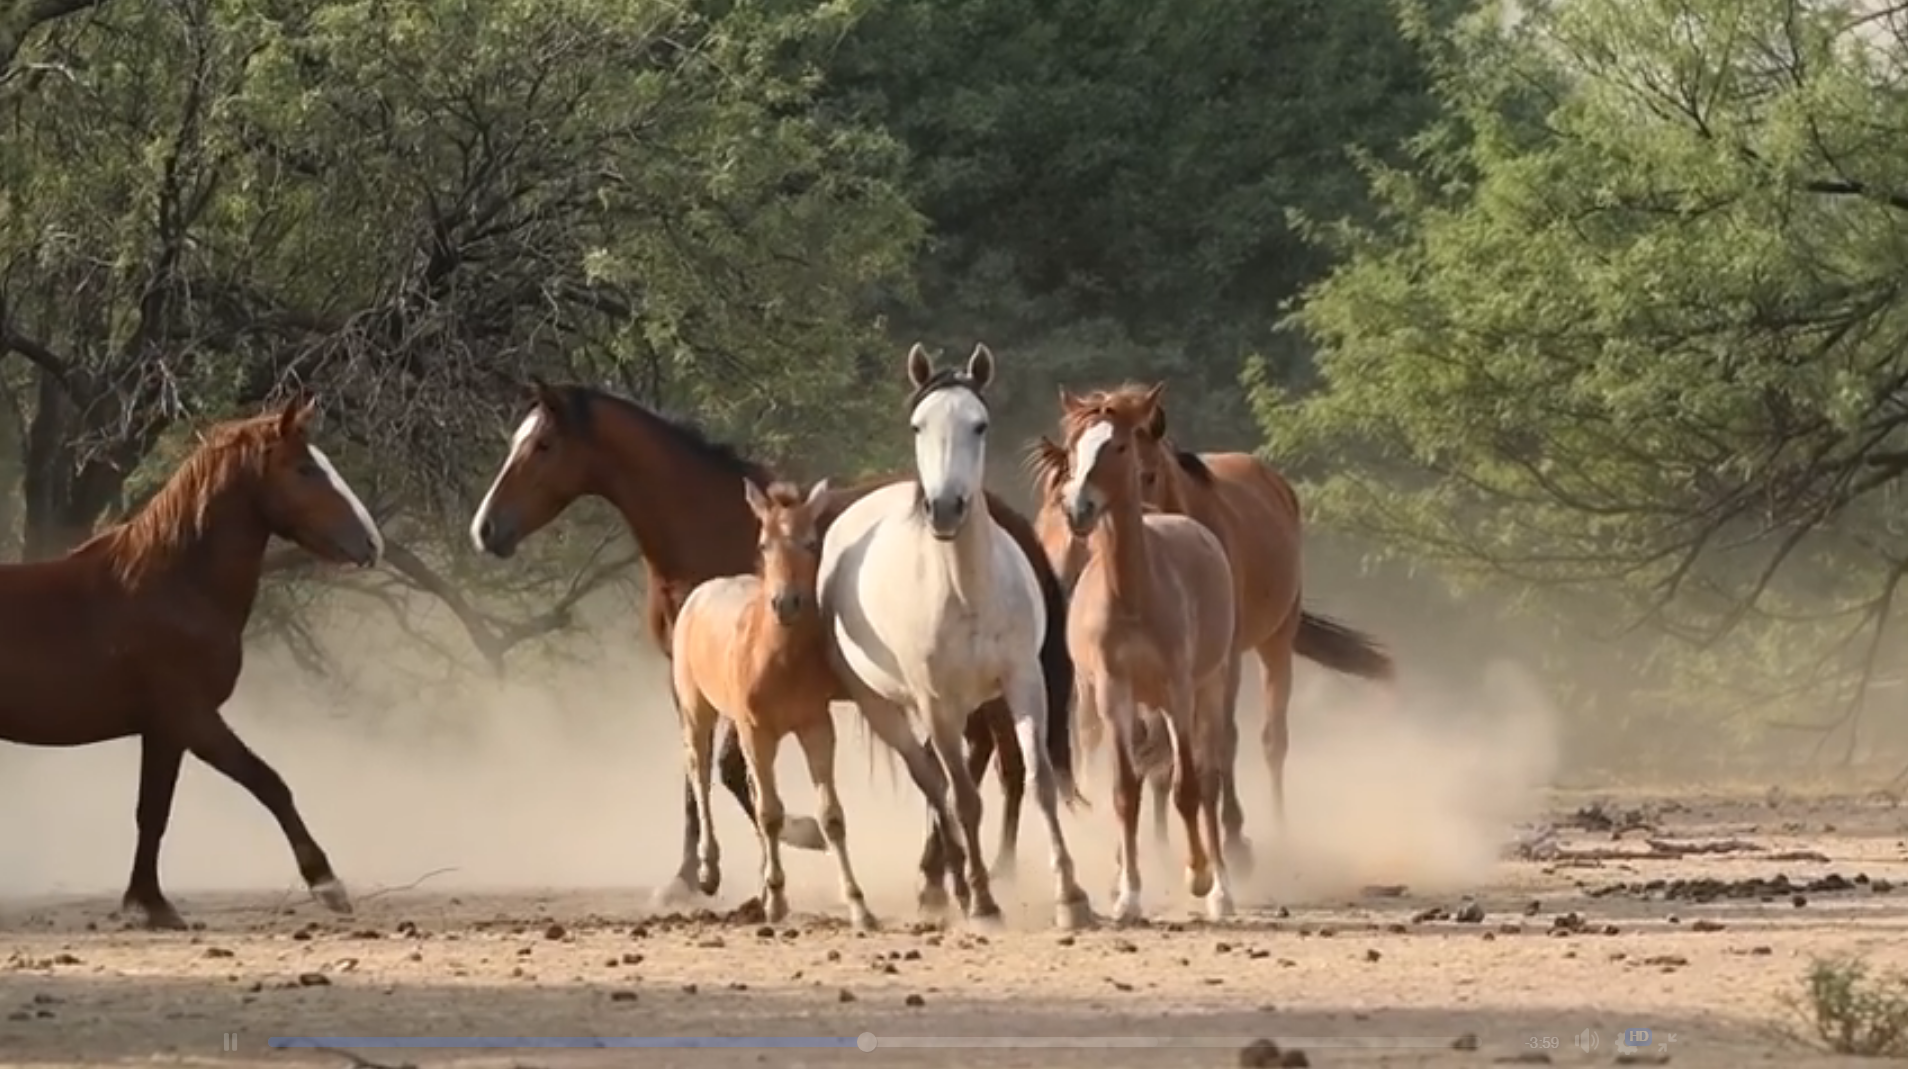 The Magnificence of Wild Horses